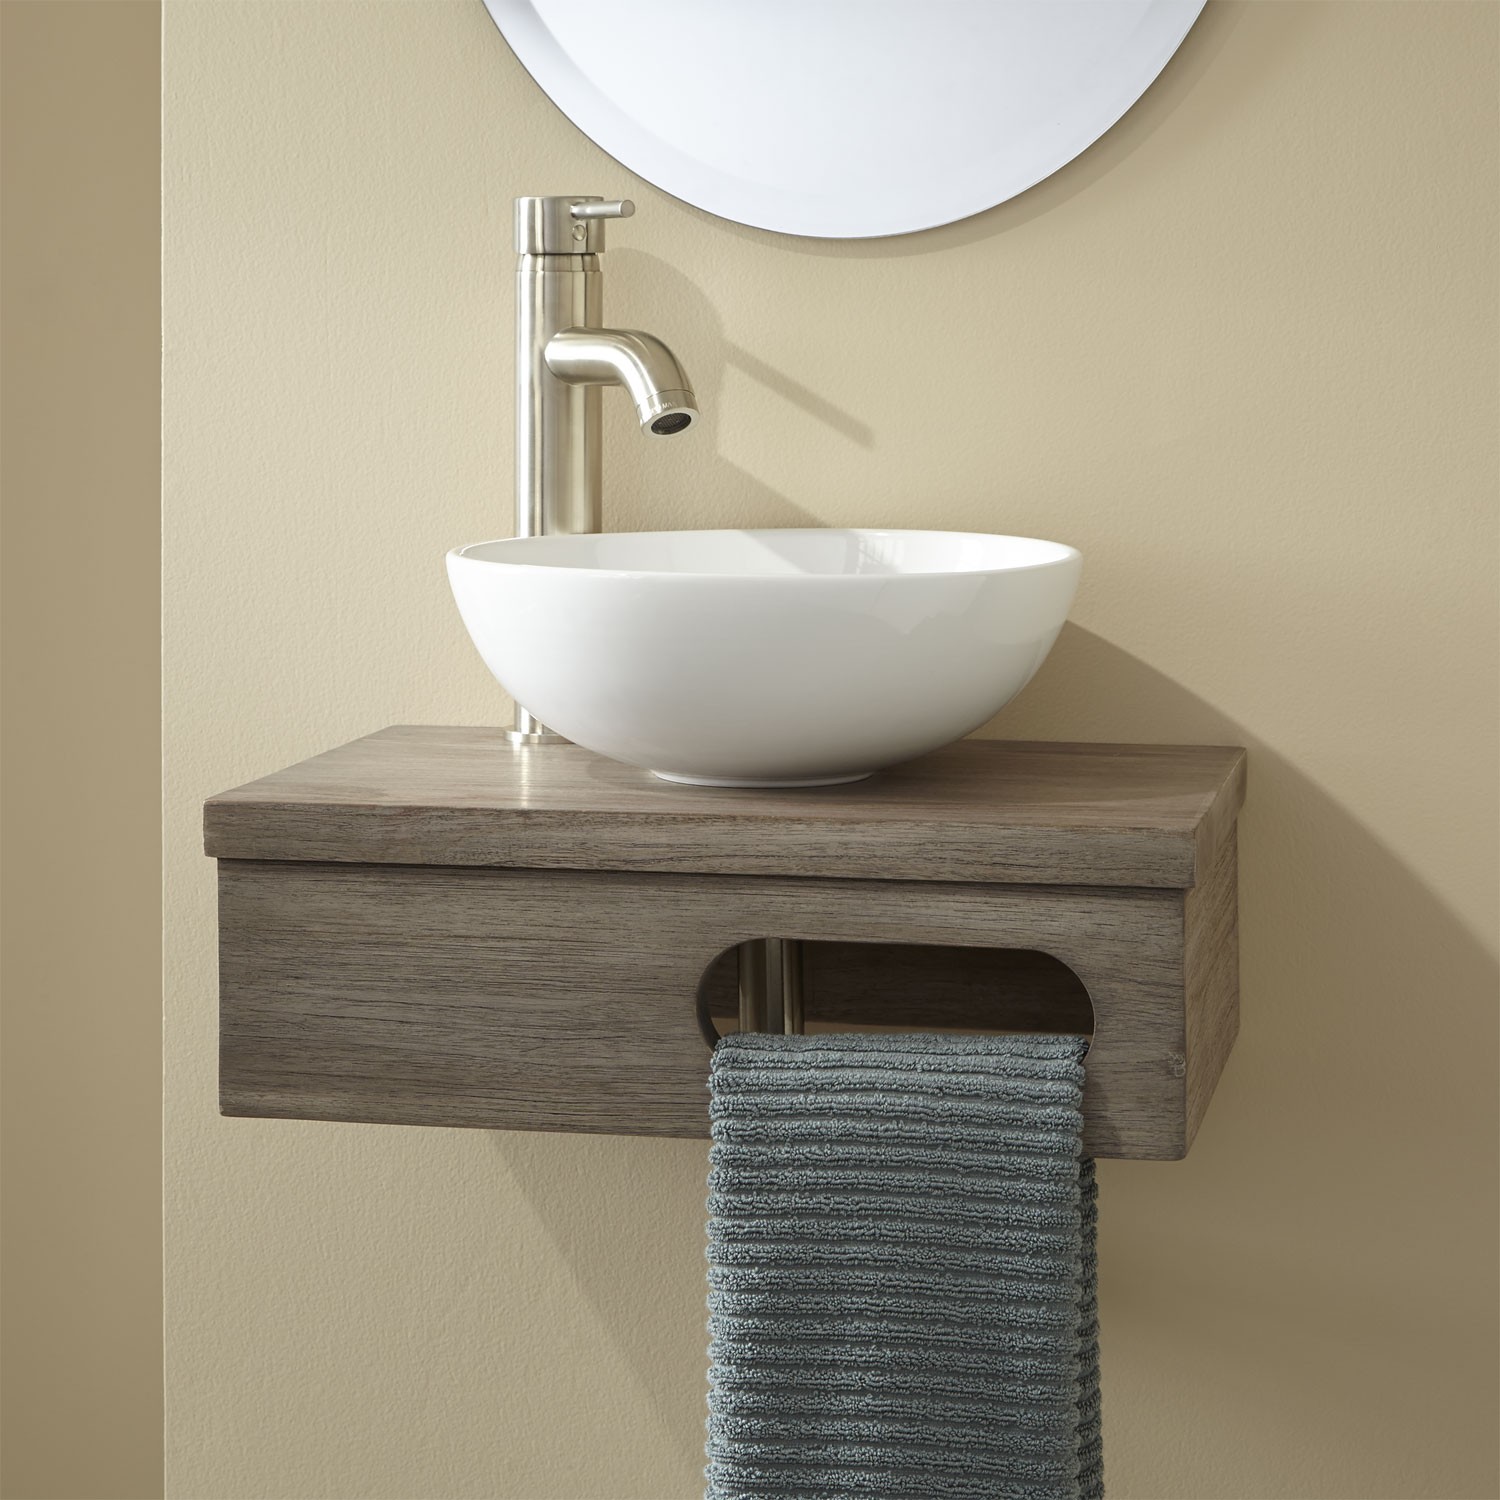 Small Bathroom Vanities And Sinks For Tiny Spaces